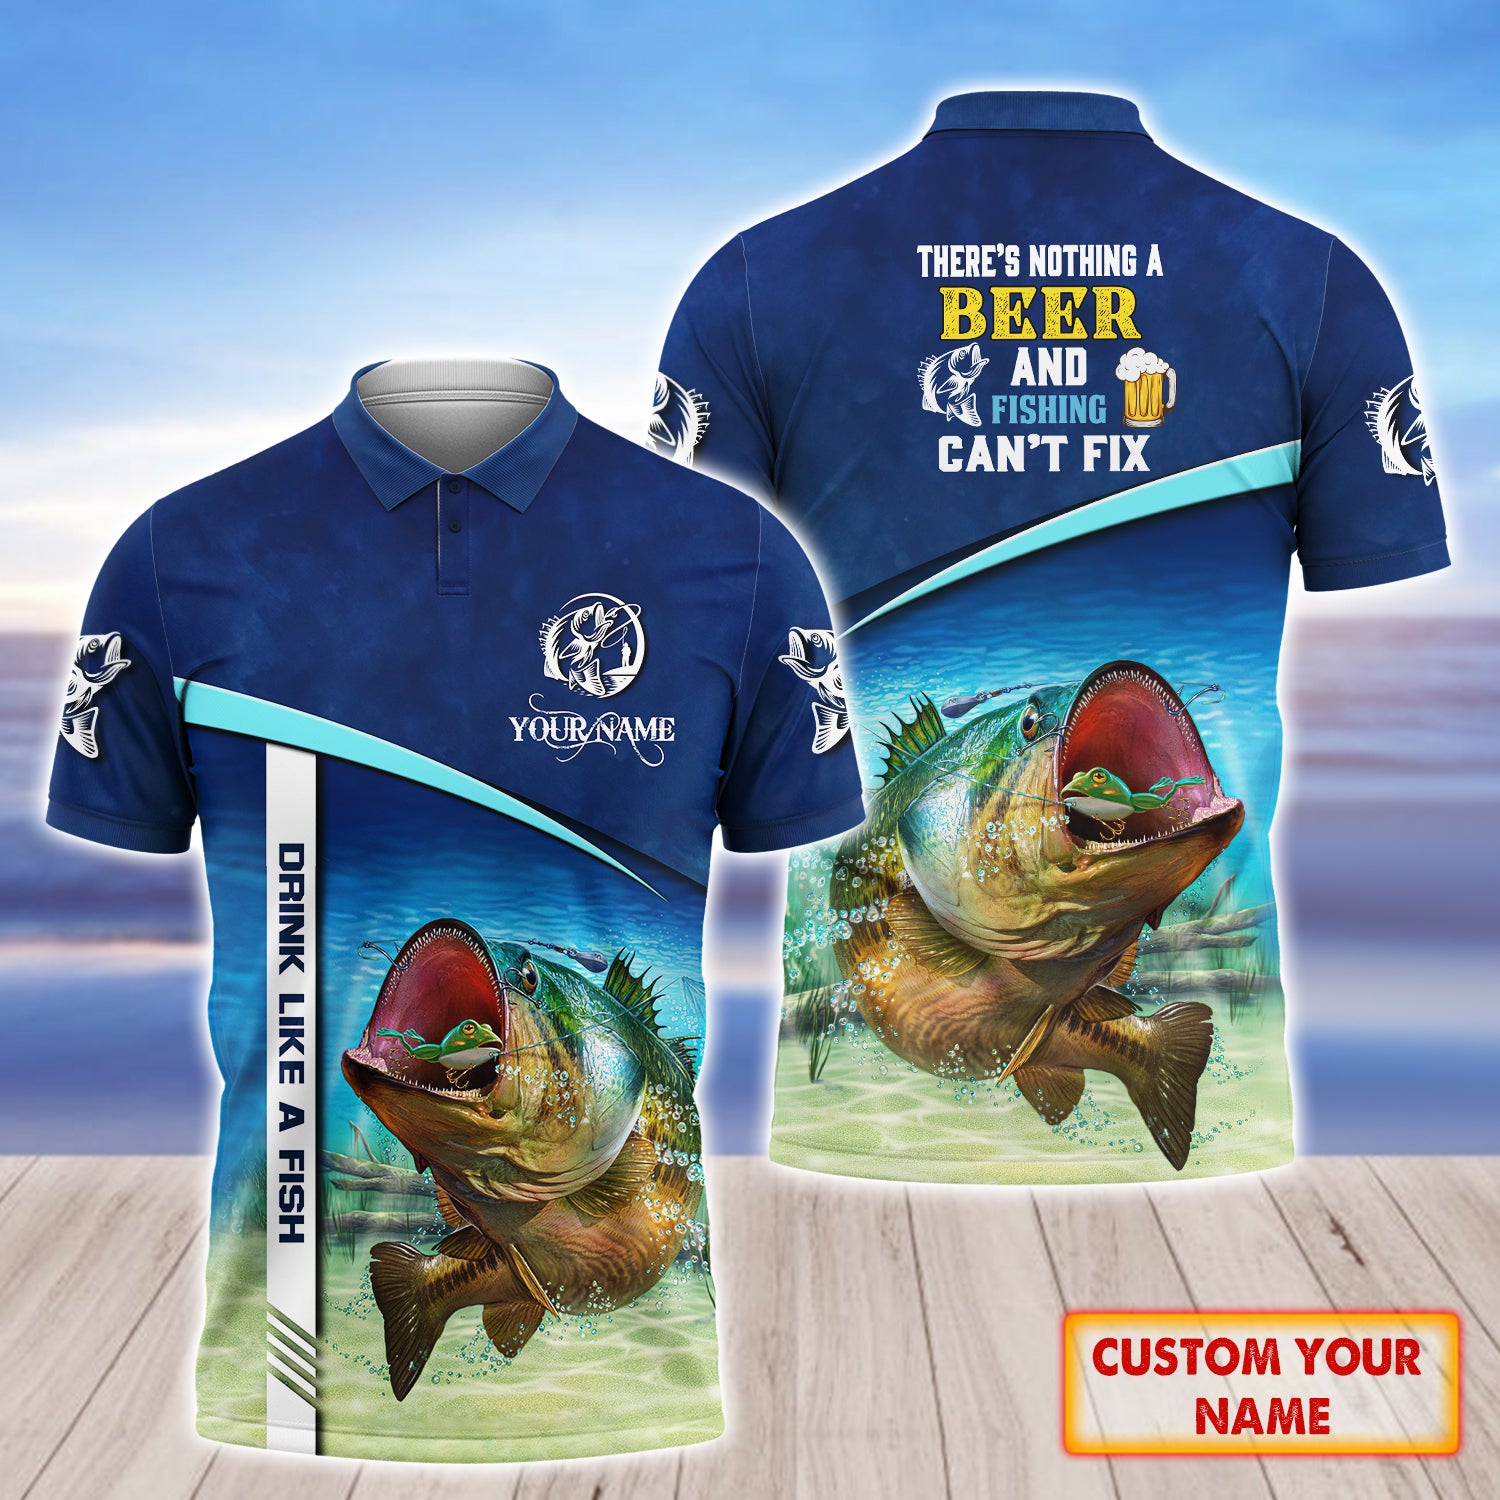 There's Nothing Beer And Fishing Can't Fix - Personalized Name 3D Polo Shirt - QB95